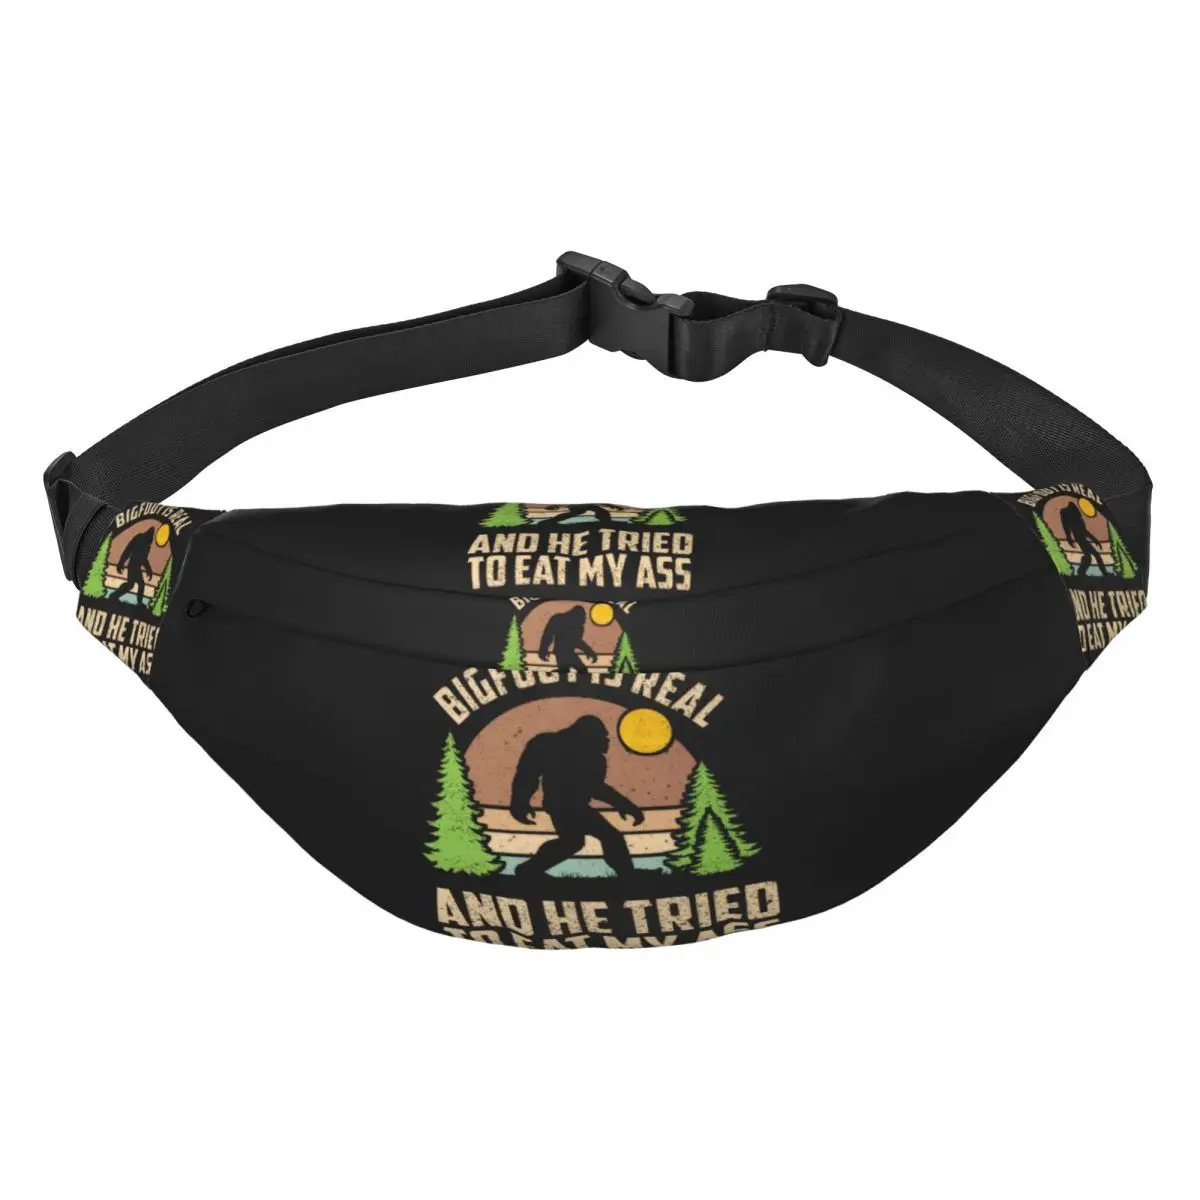 Bigfoot Is Real And He Tried To Eat My Ass Unisex Waist Bag Multifunction Sling Crossbody Bags Chest Bags Short Trip Waist Pack